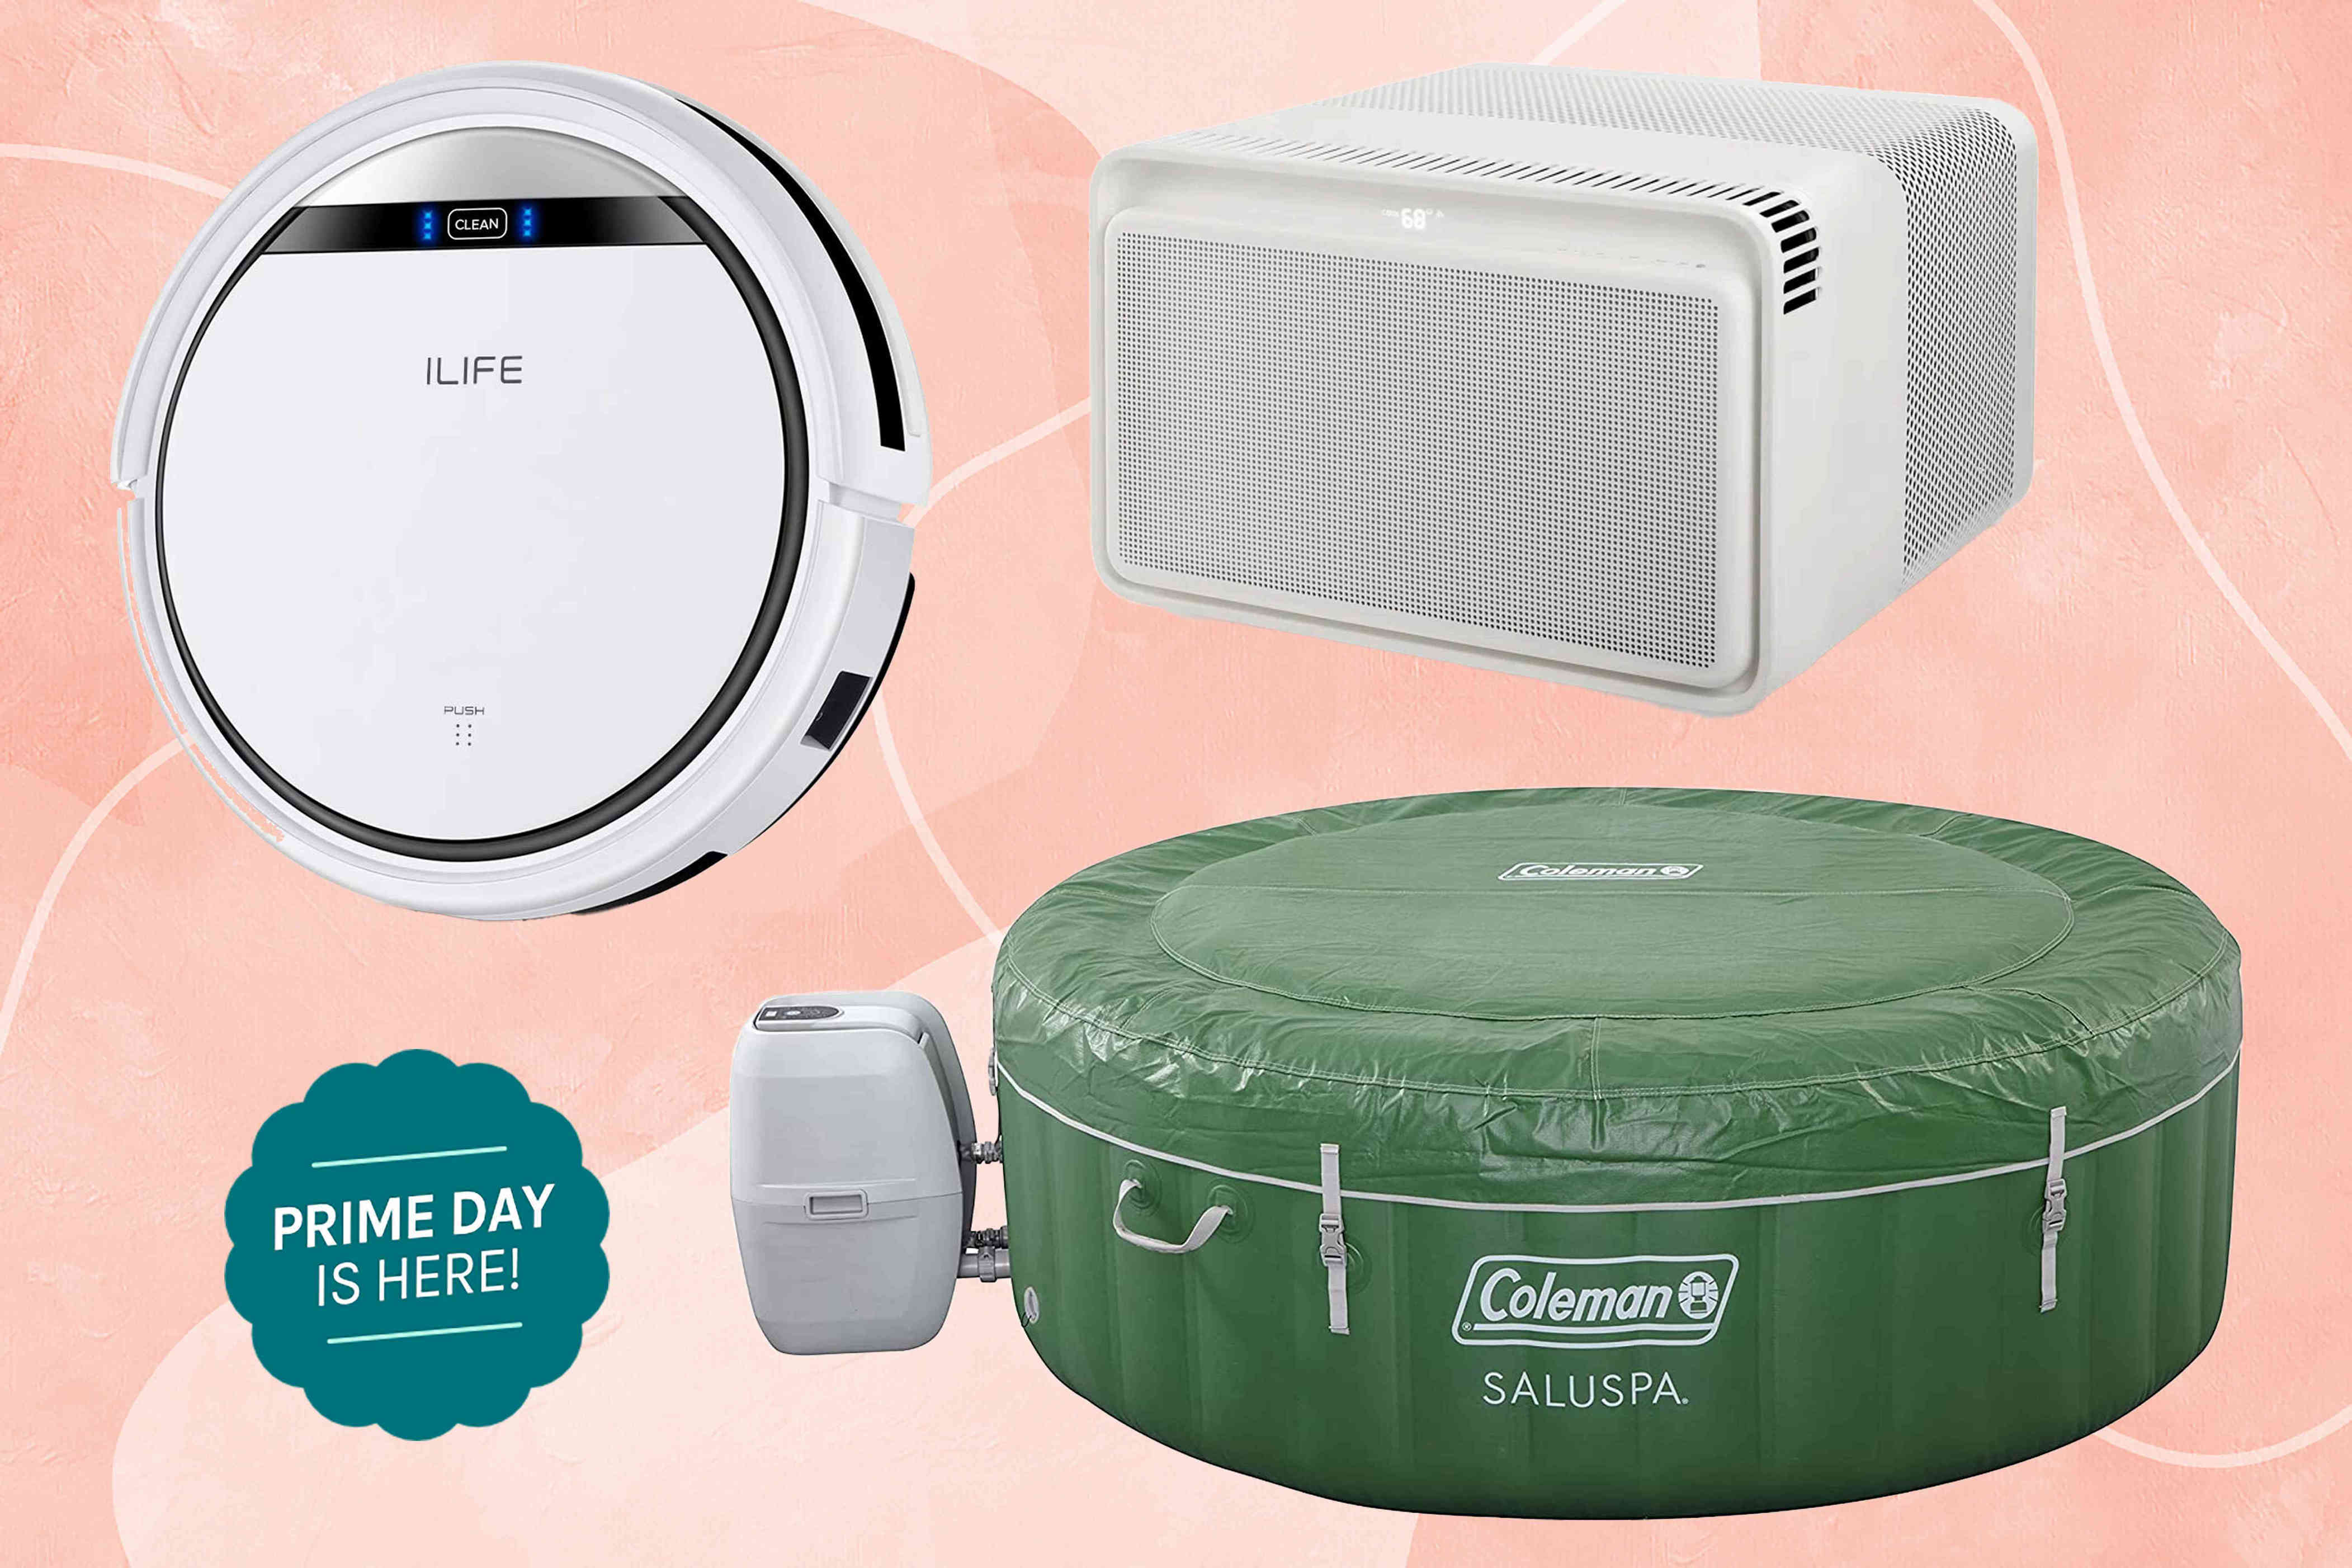 Prime Day appliance deals: Save on Keurig, Levoit and Shark